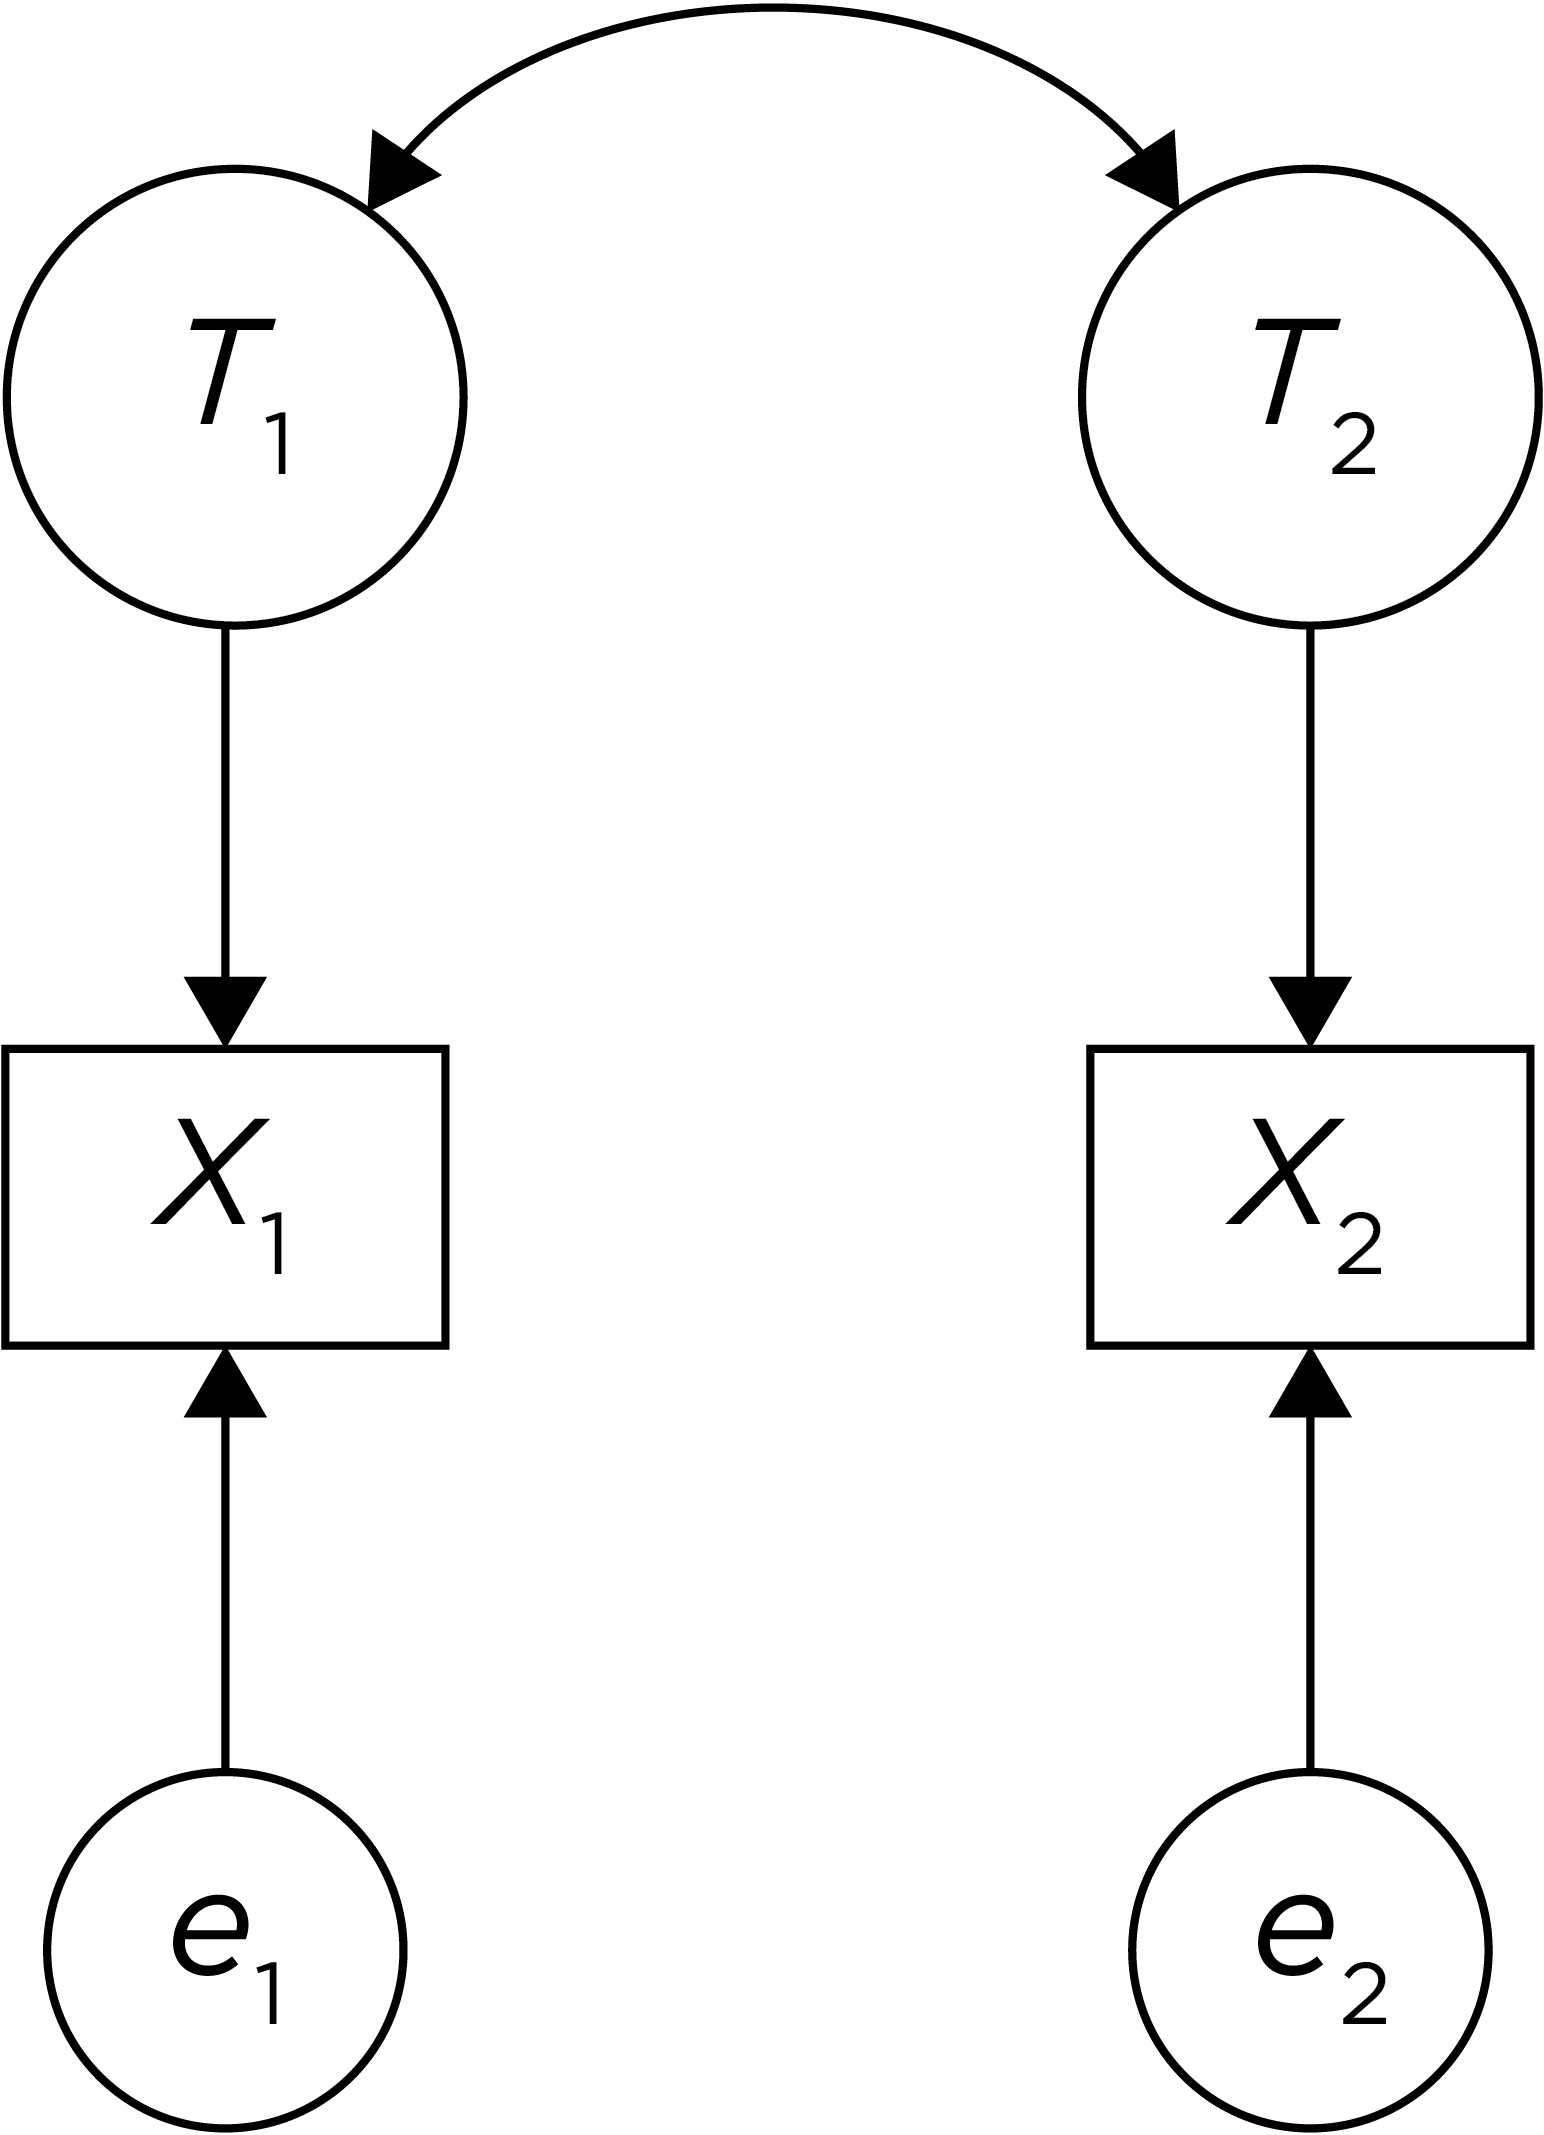 Reliability of a Measure Across Two Time Points, as Depicted in a Path Diagram.